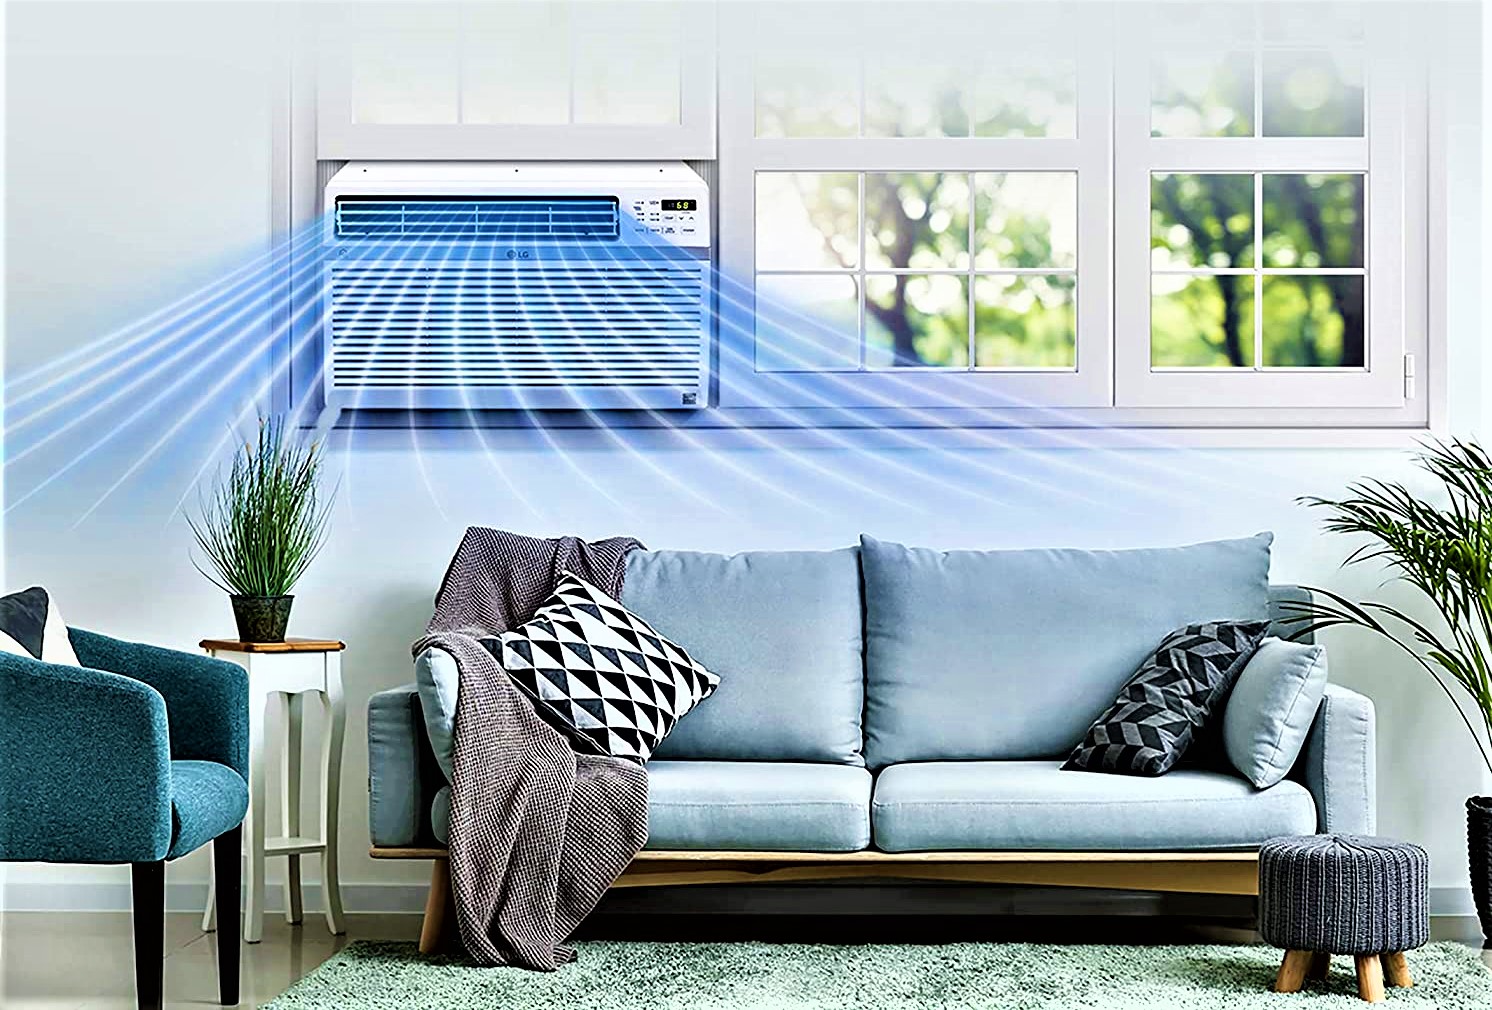 LG 8,000 BTU 115V Window-Mounted Air Conditioner with Remote Control